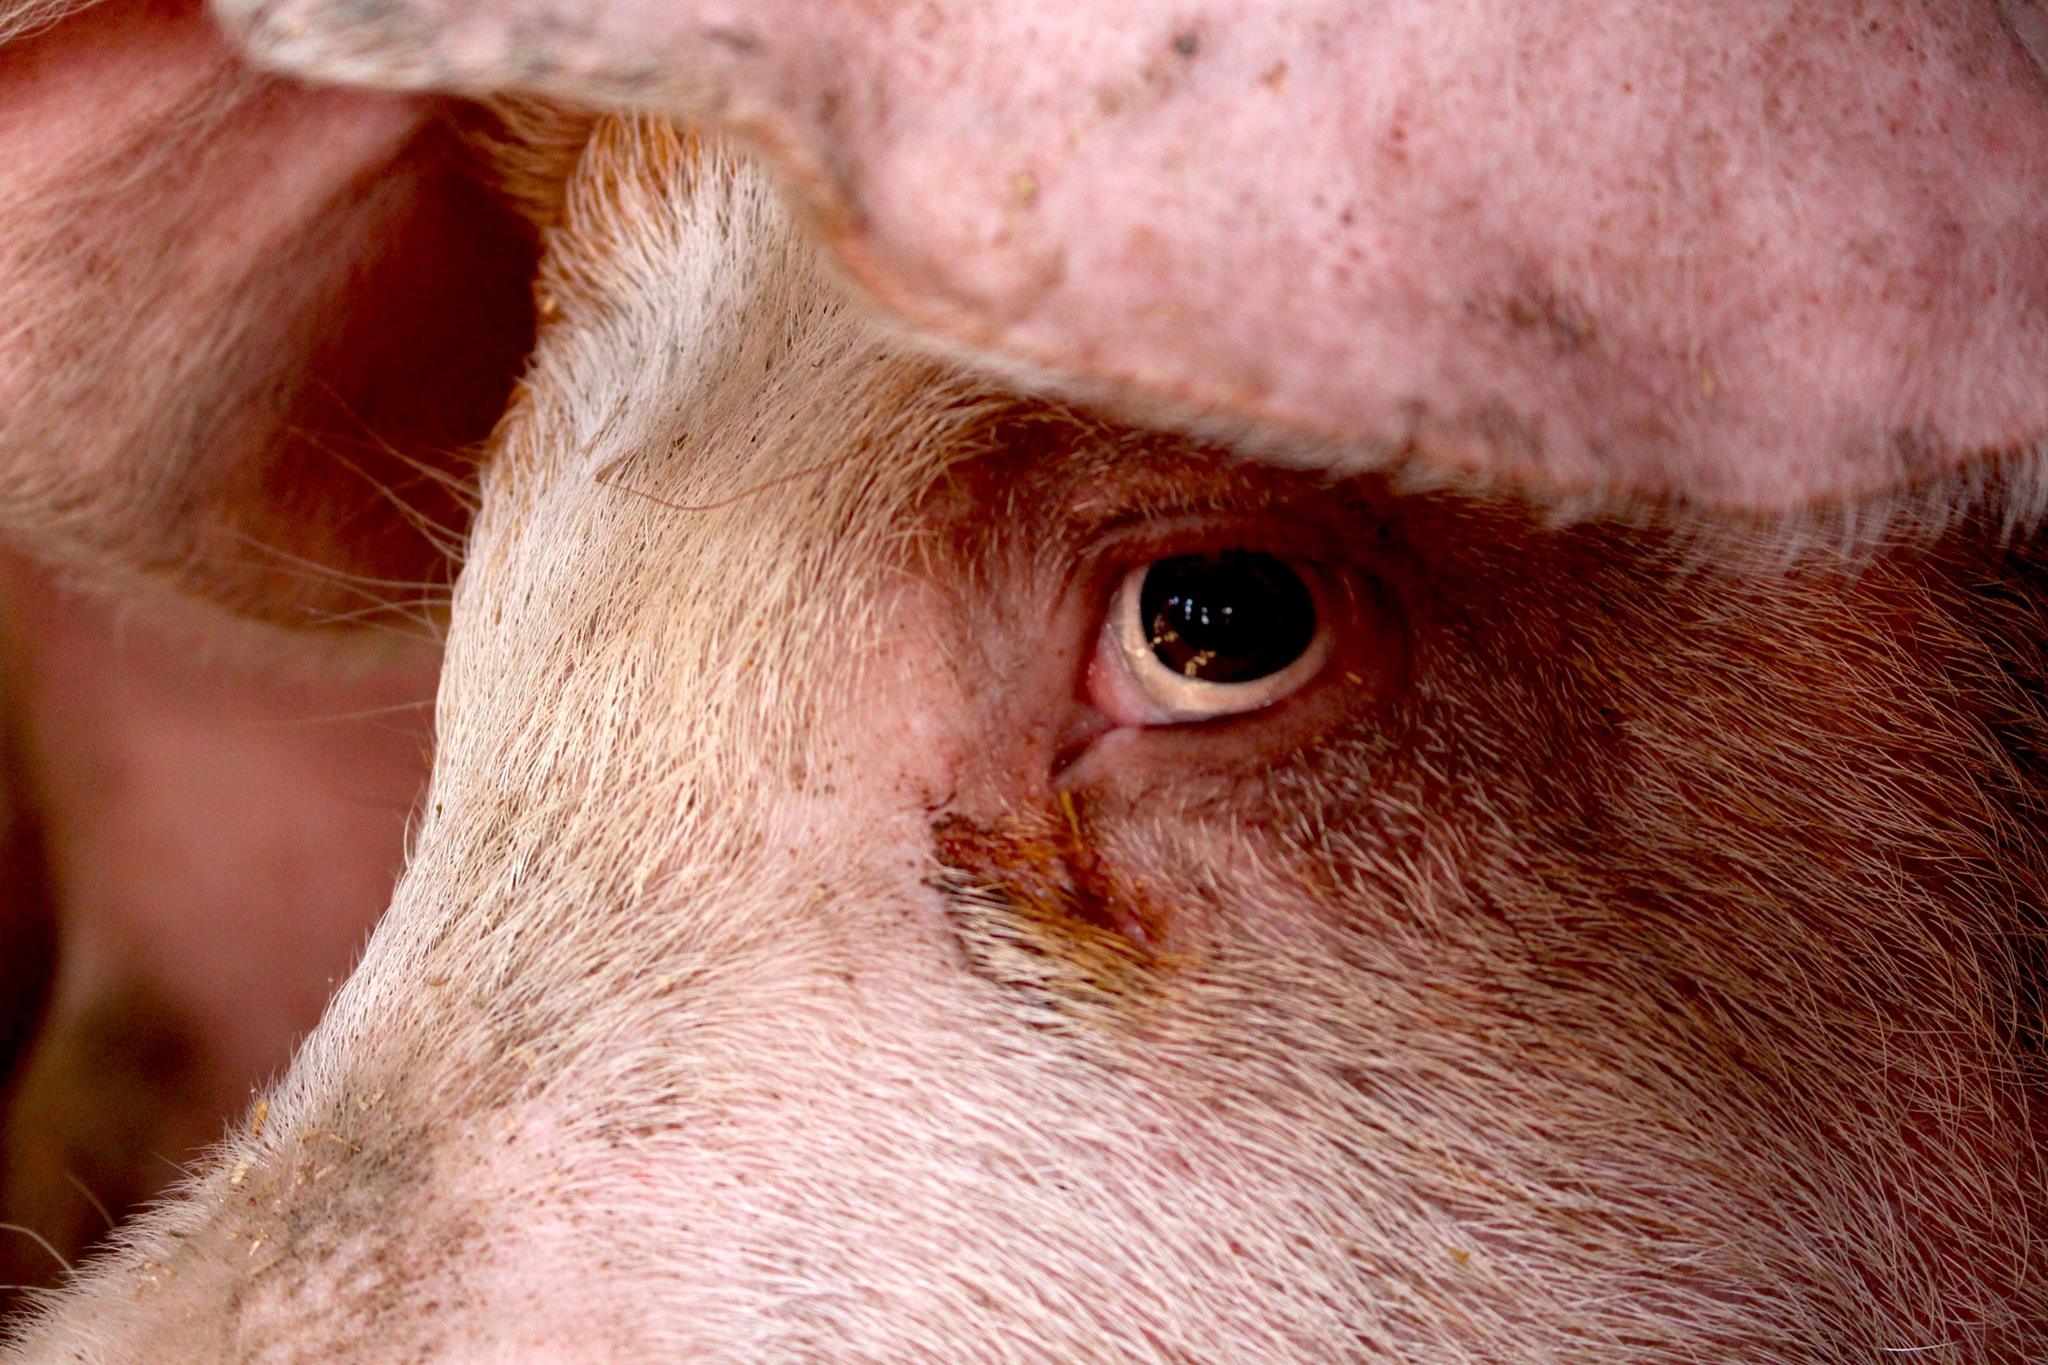 What Do Ontario’s New Slaughter Laws Mean For Animals?